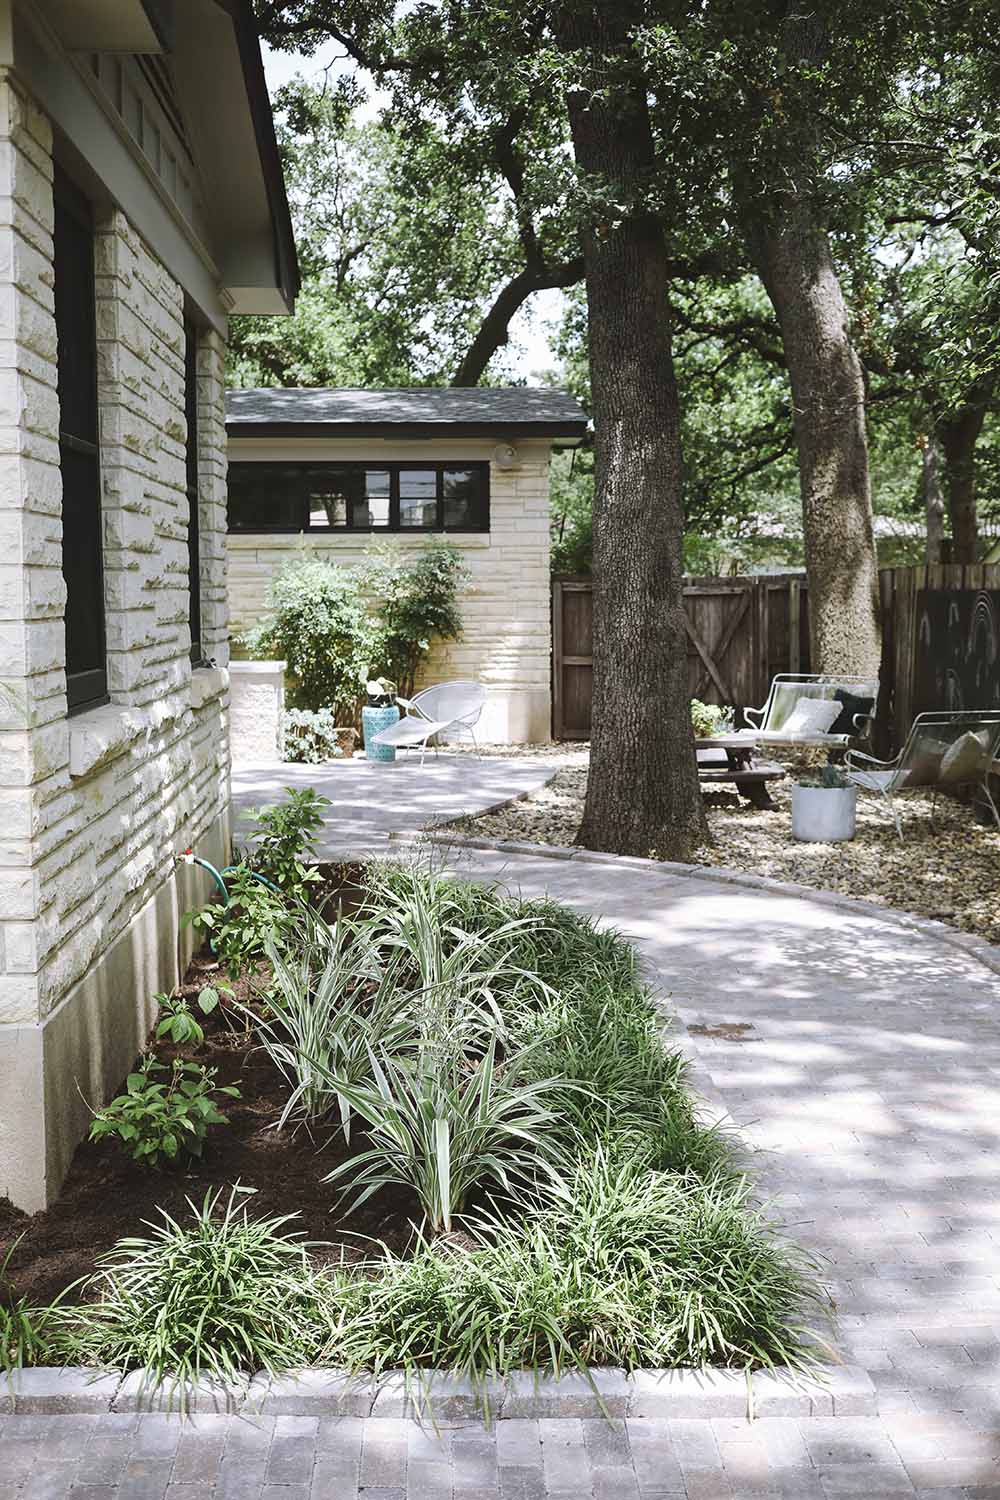 A path of pavers leading to a backyard on the side of a home.